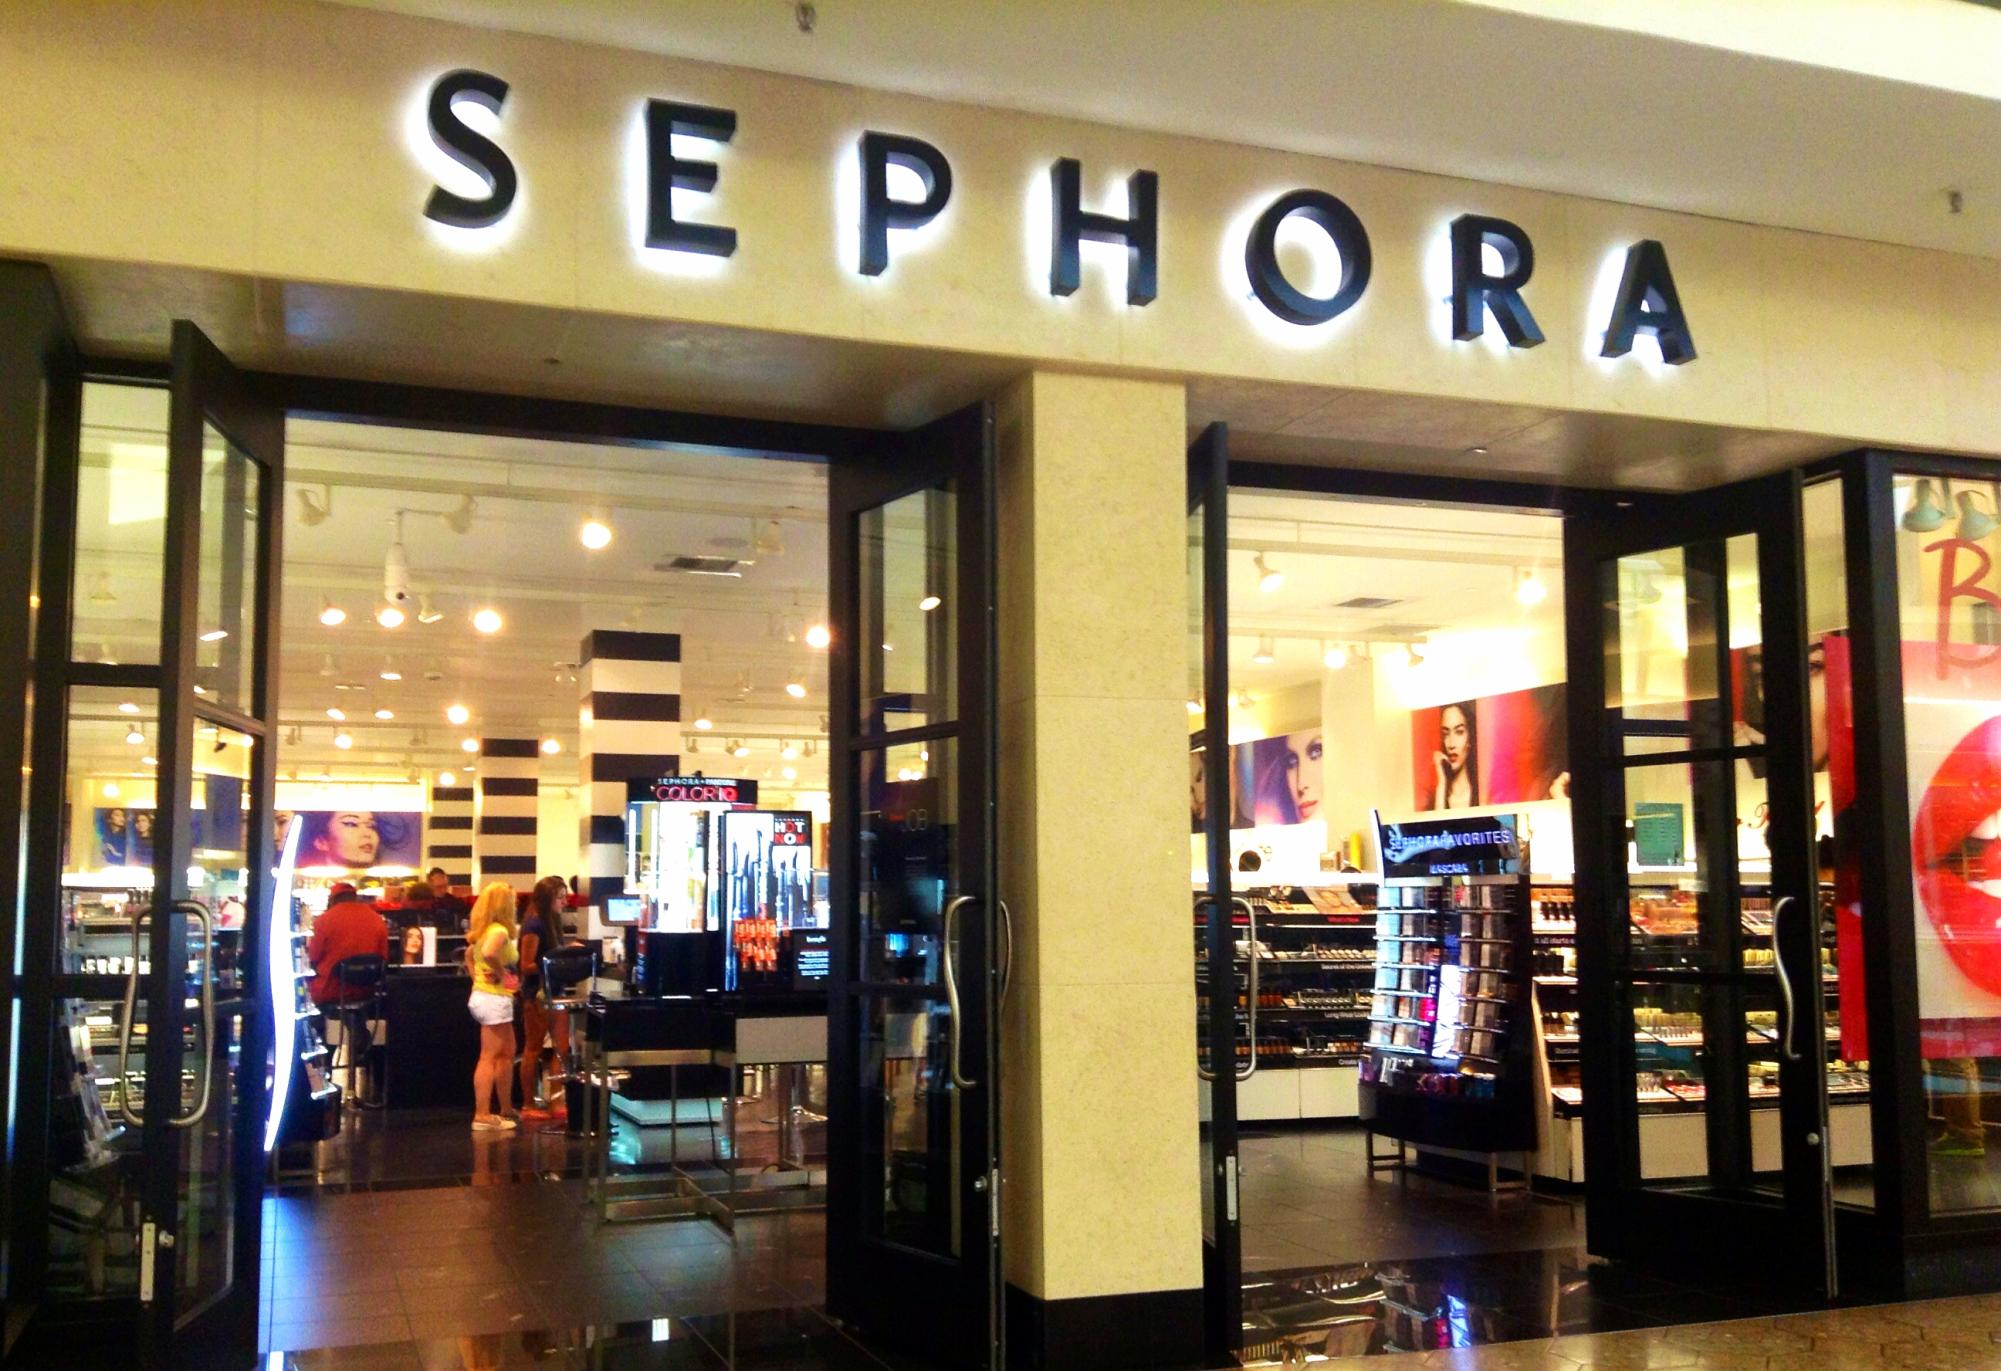 Going to beauty stores like Sephora was once a favorite hobby of teenage girls, however, has been ruined by entitled young girls.